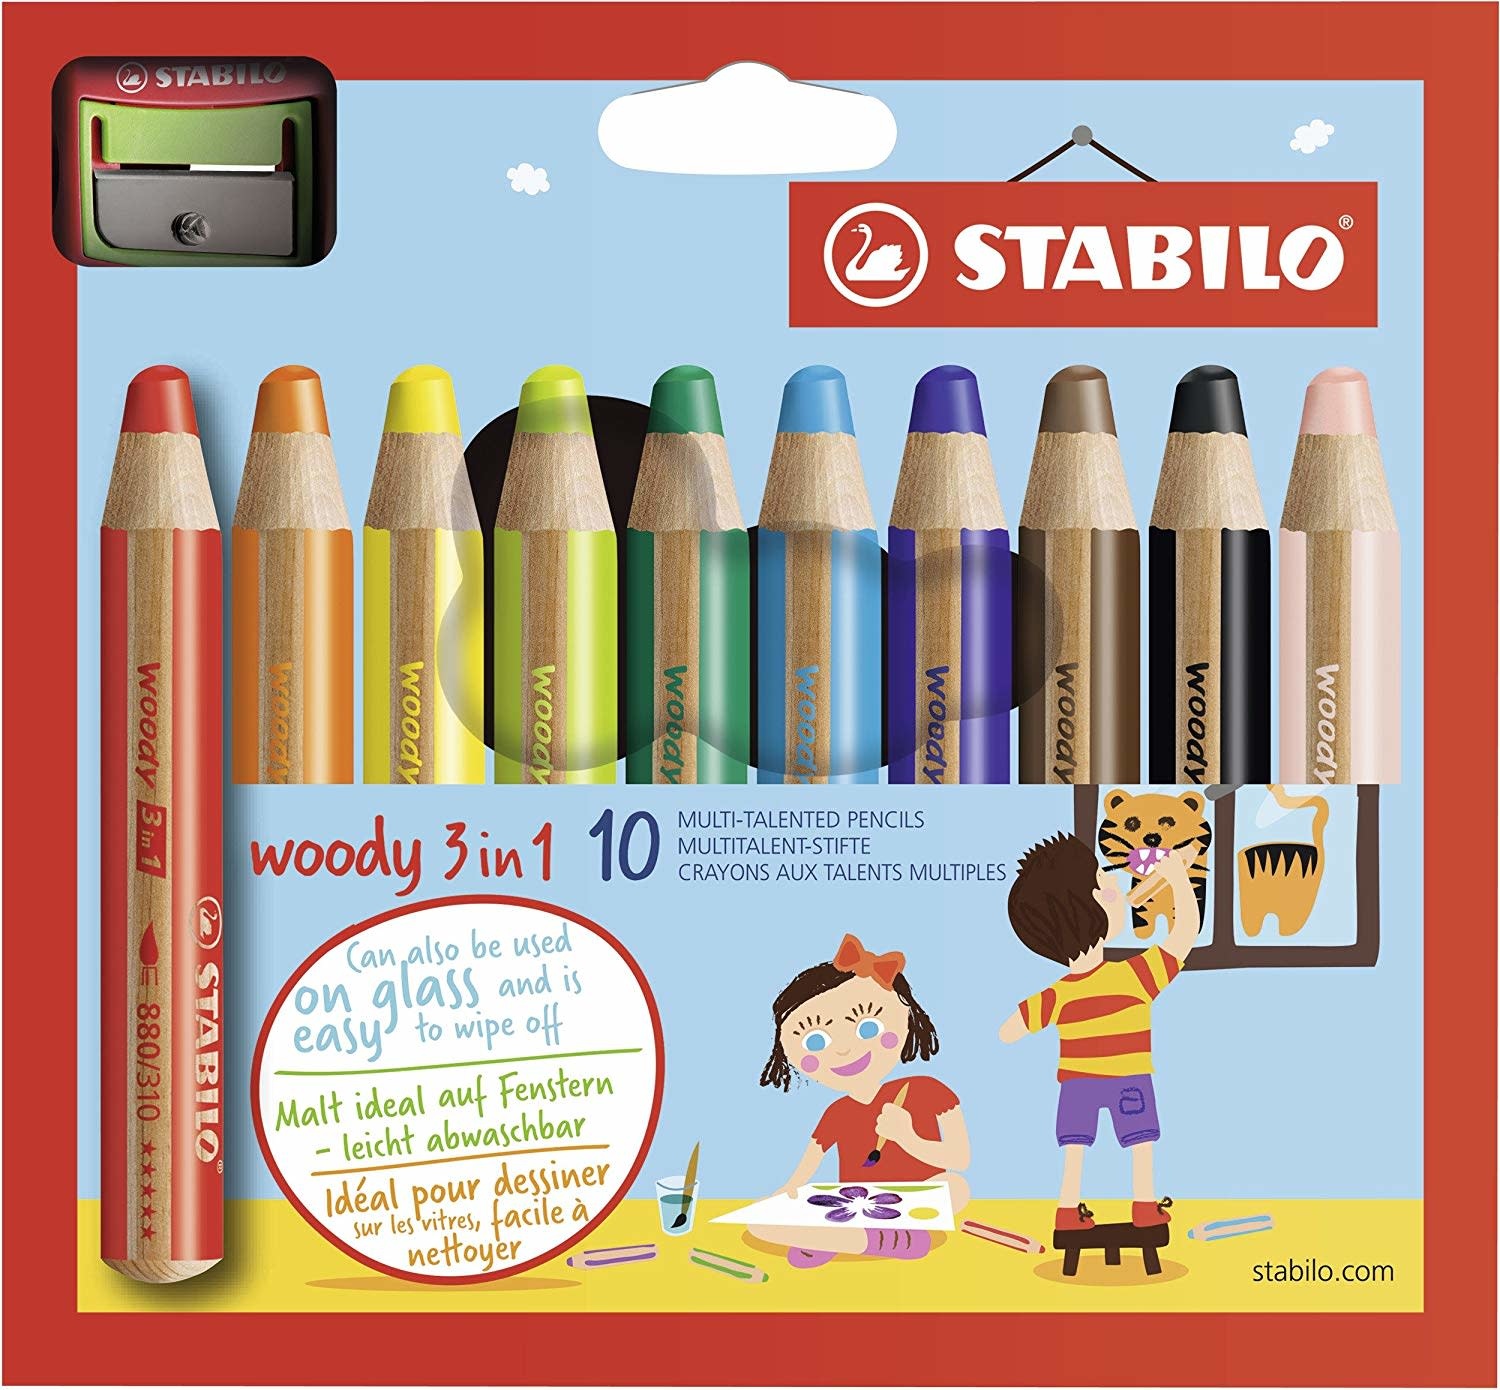 Etui carton 6 crayons multi-talents STABILO woody 3in1 ARTY + 1 taille- crayon